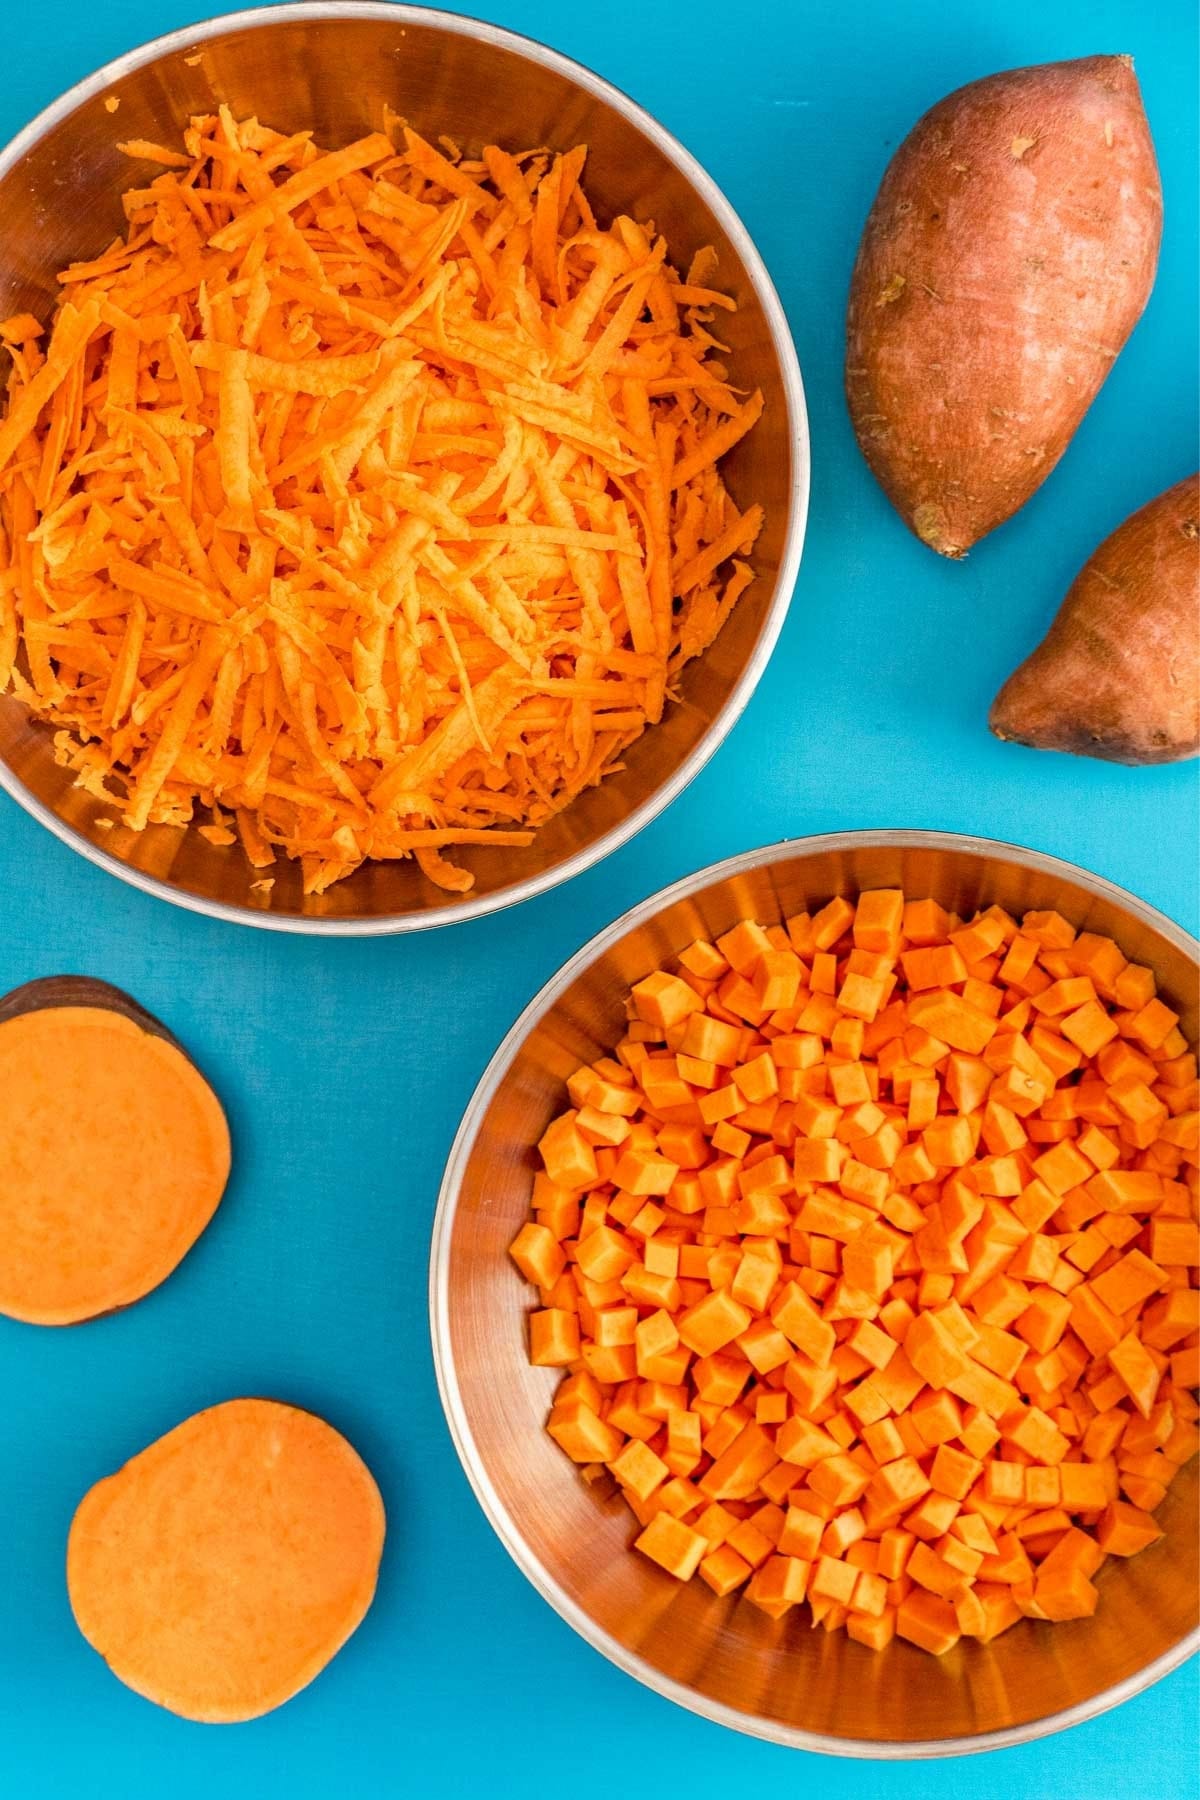 Sweet potato shreds and diced sweet potatoes in bowls